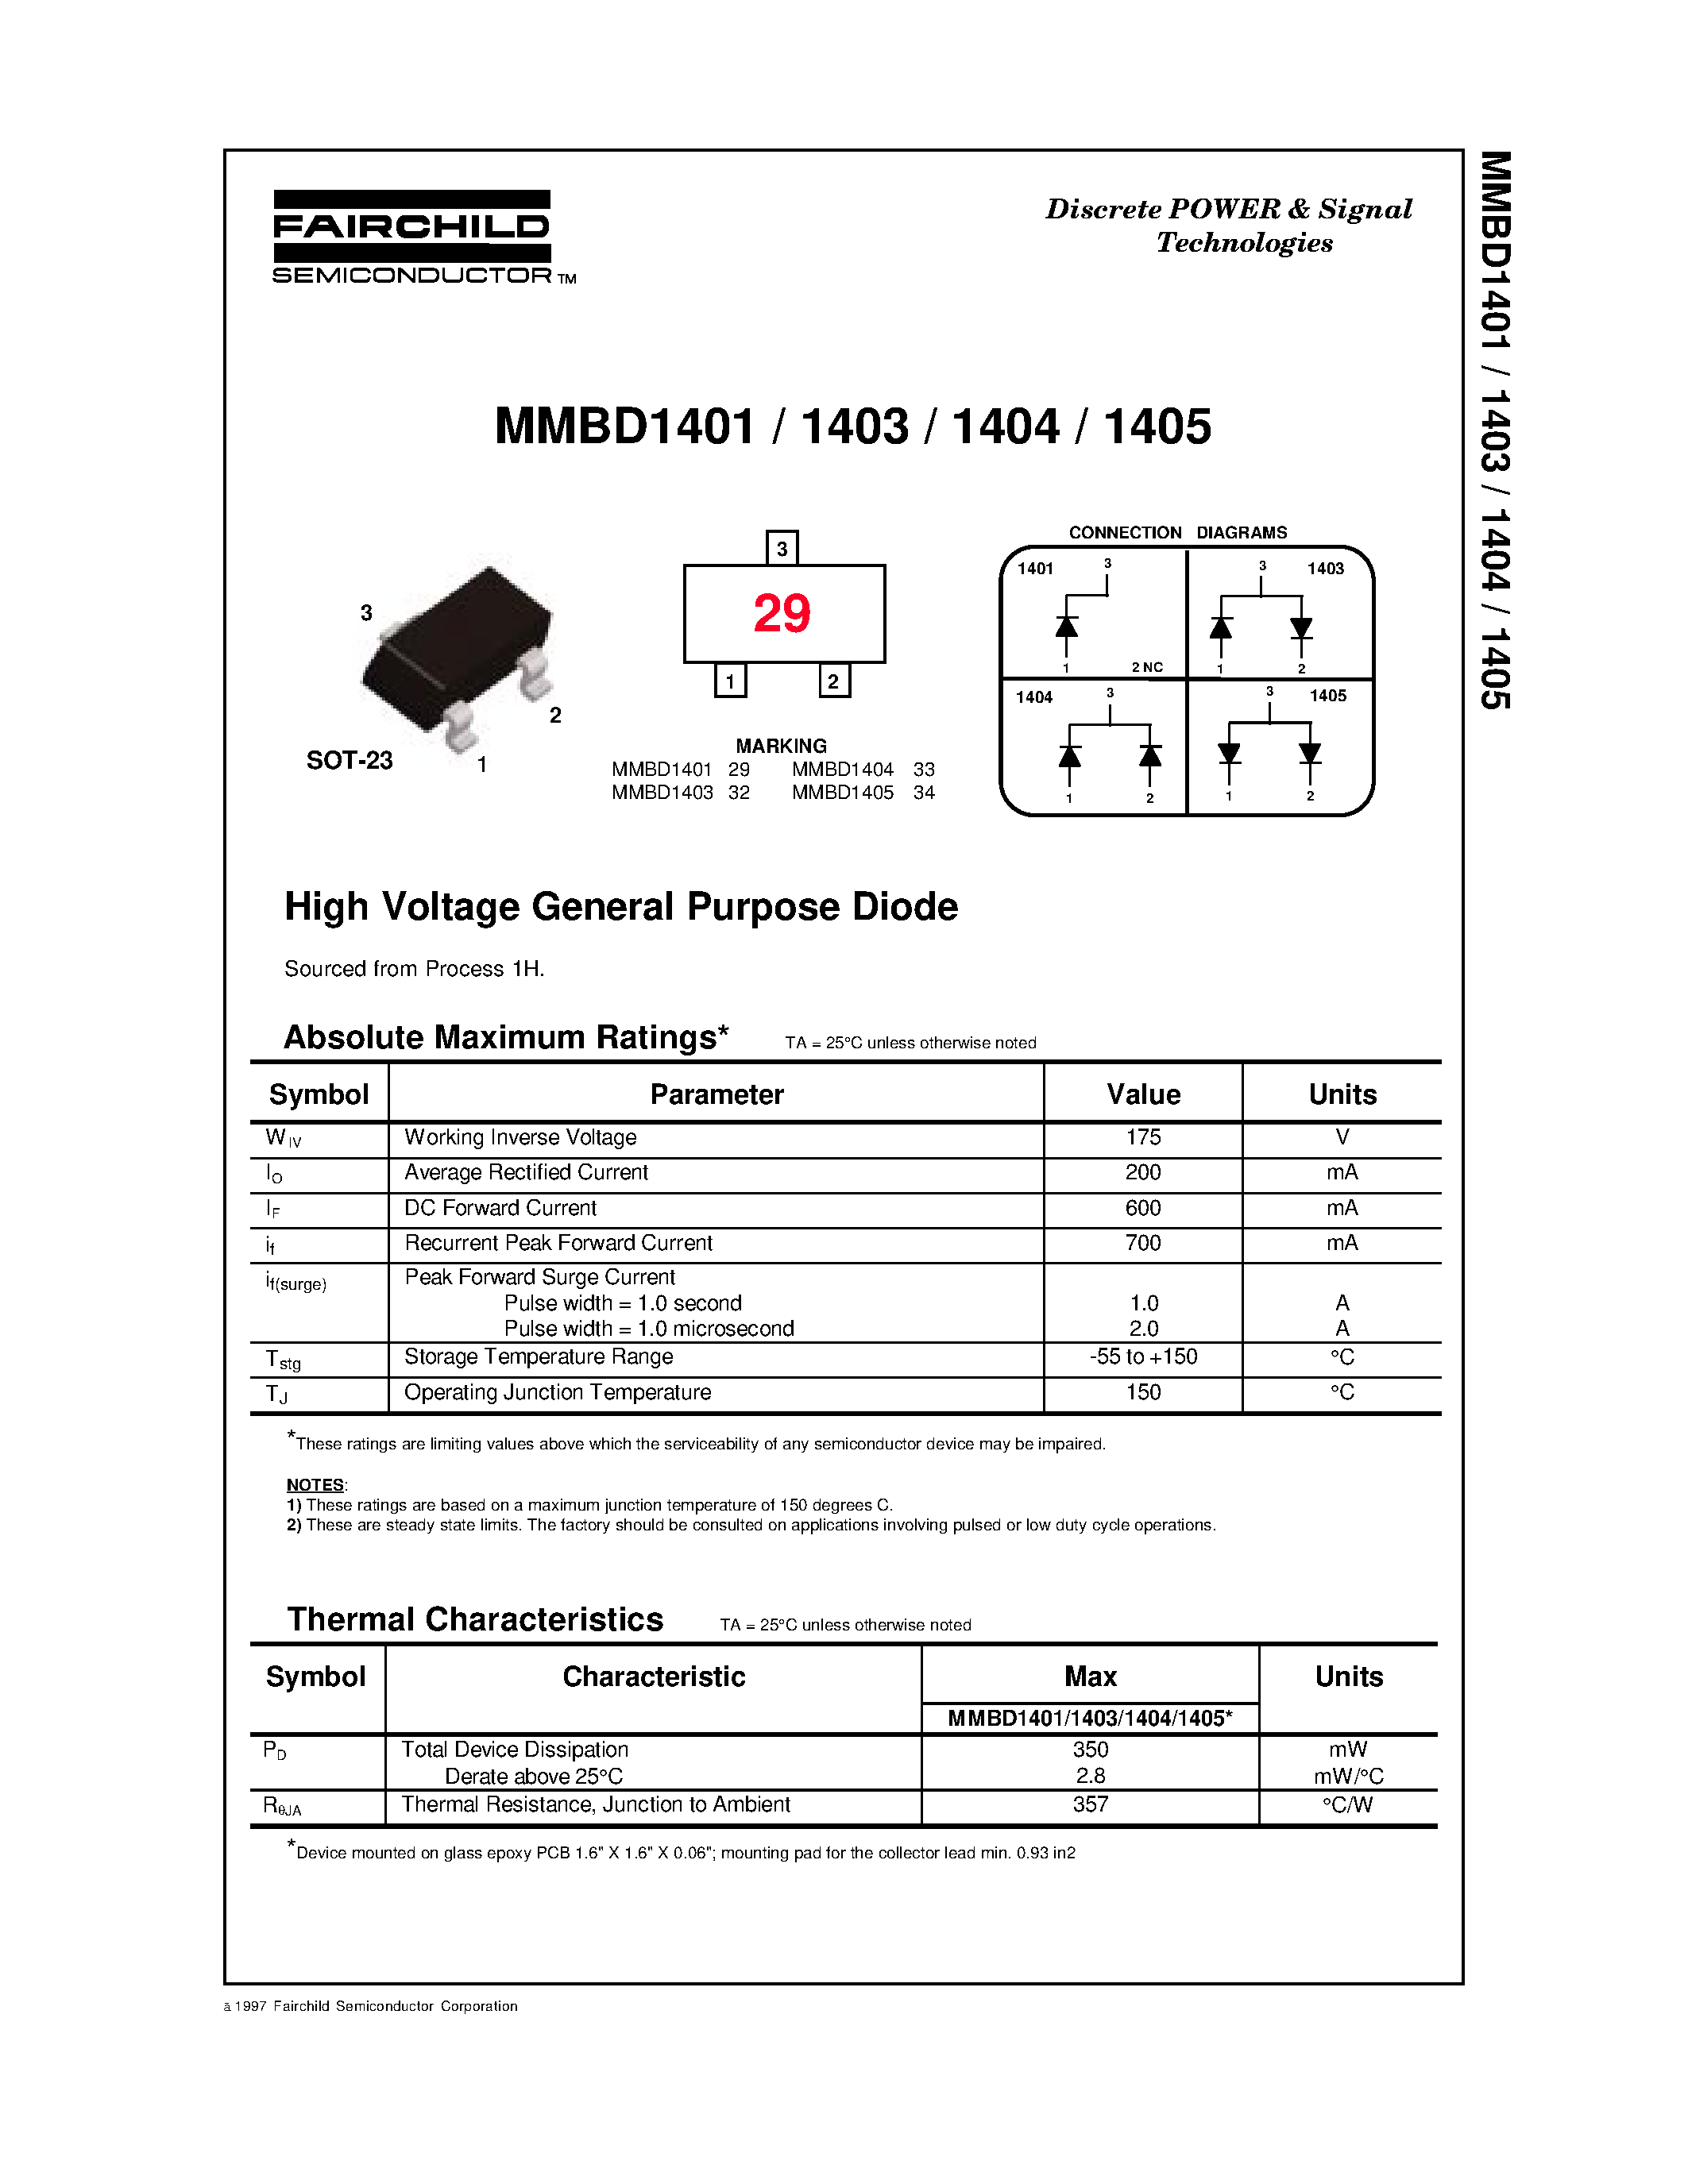 Даташит MMBD1403 - High Voltage General Purpose Diode страница 1